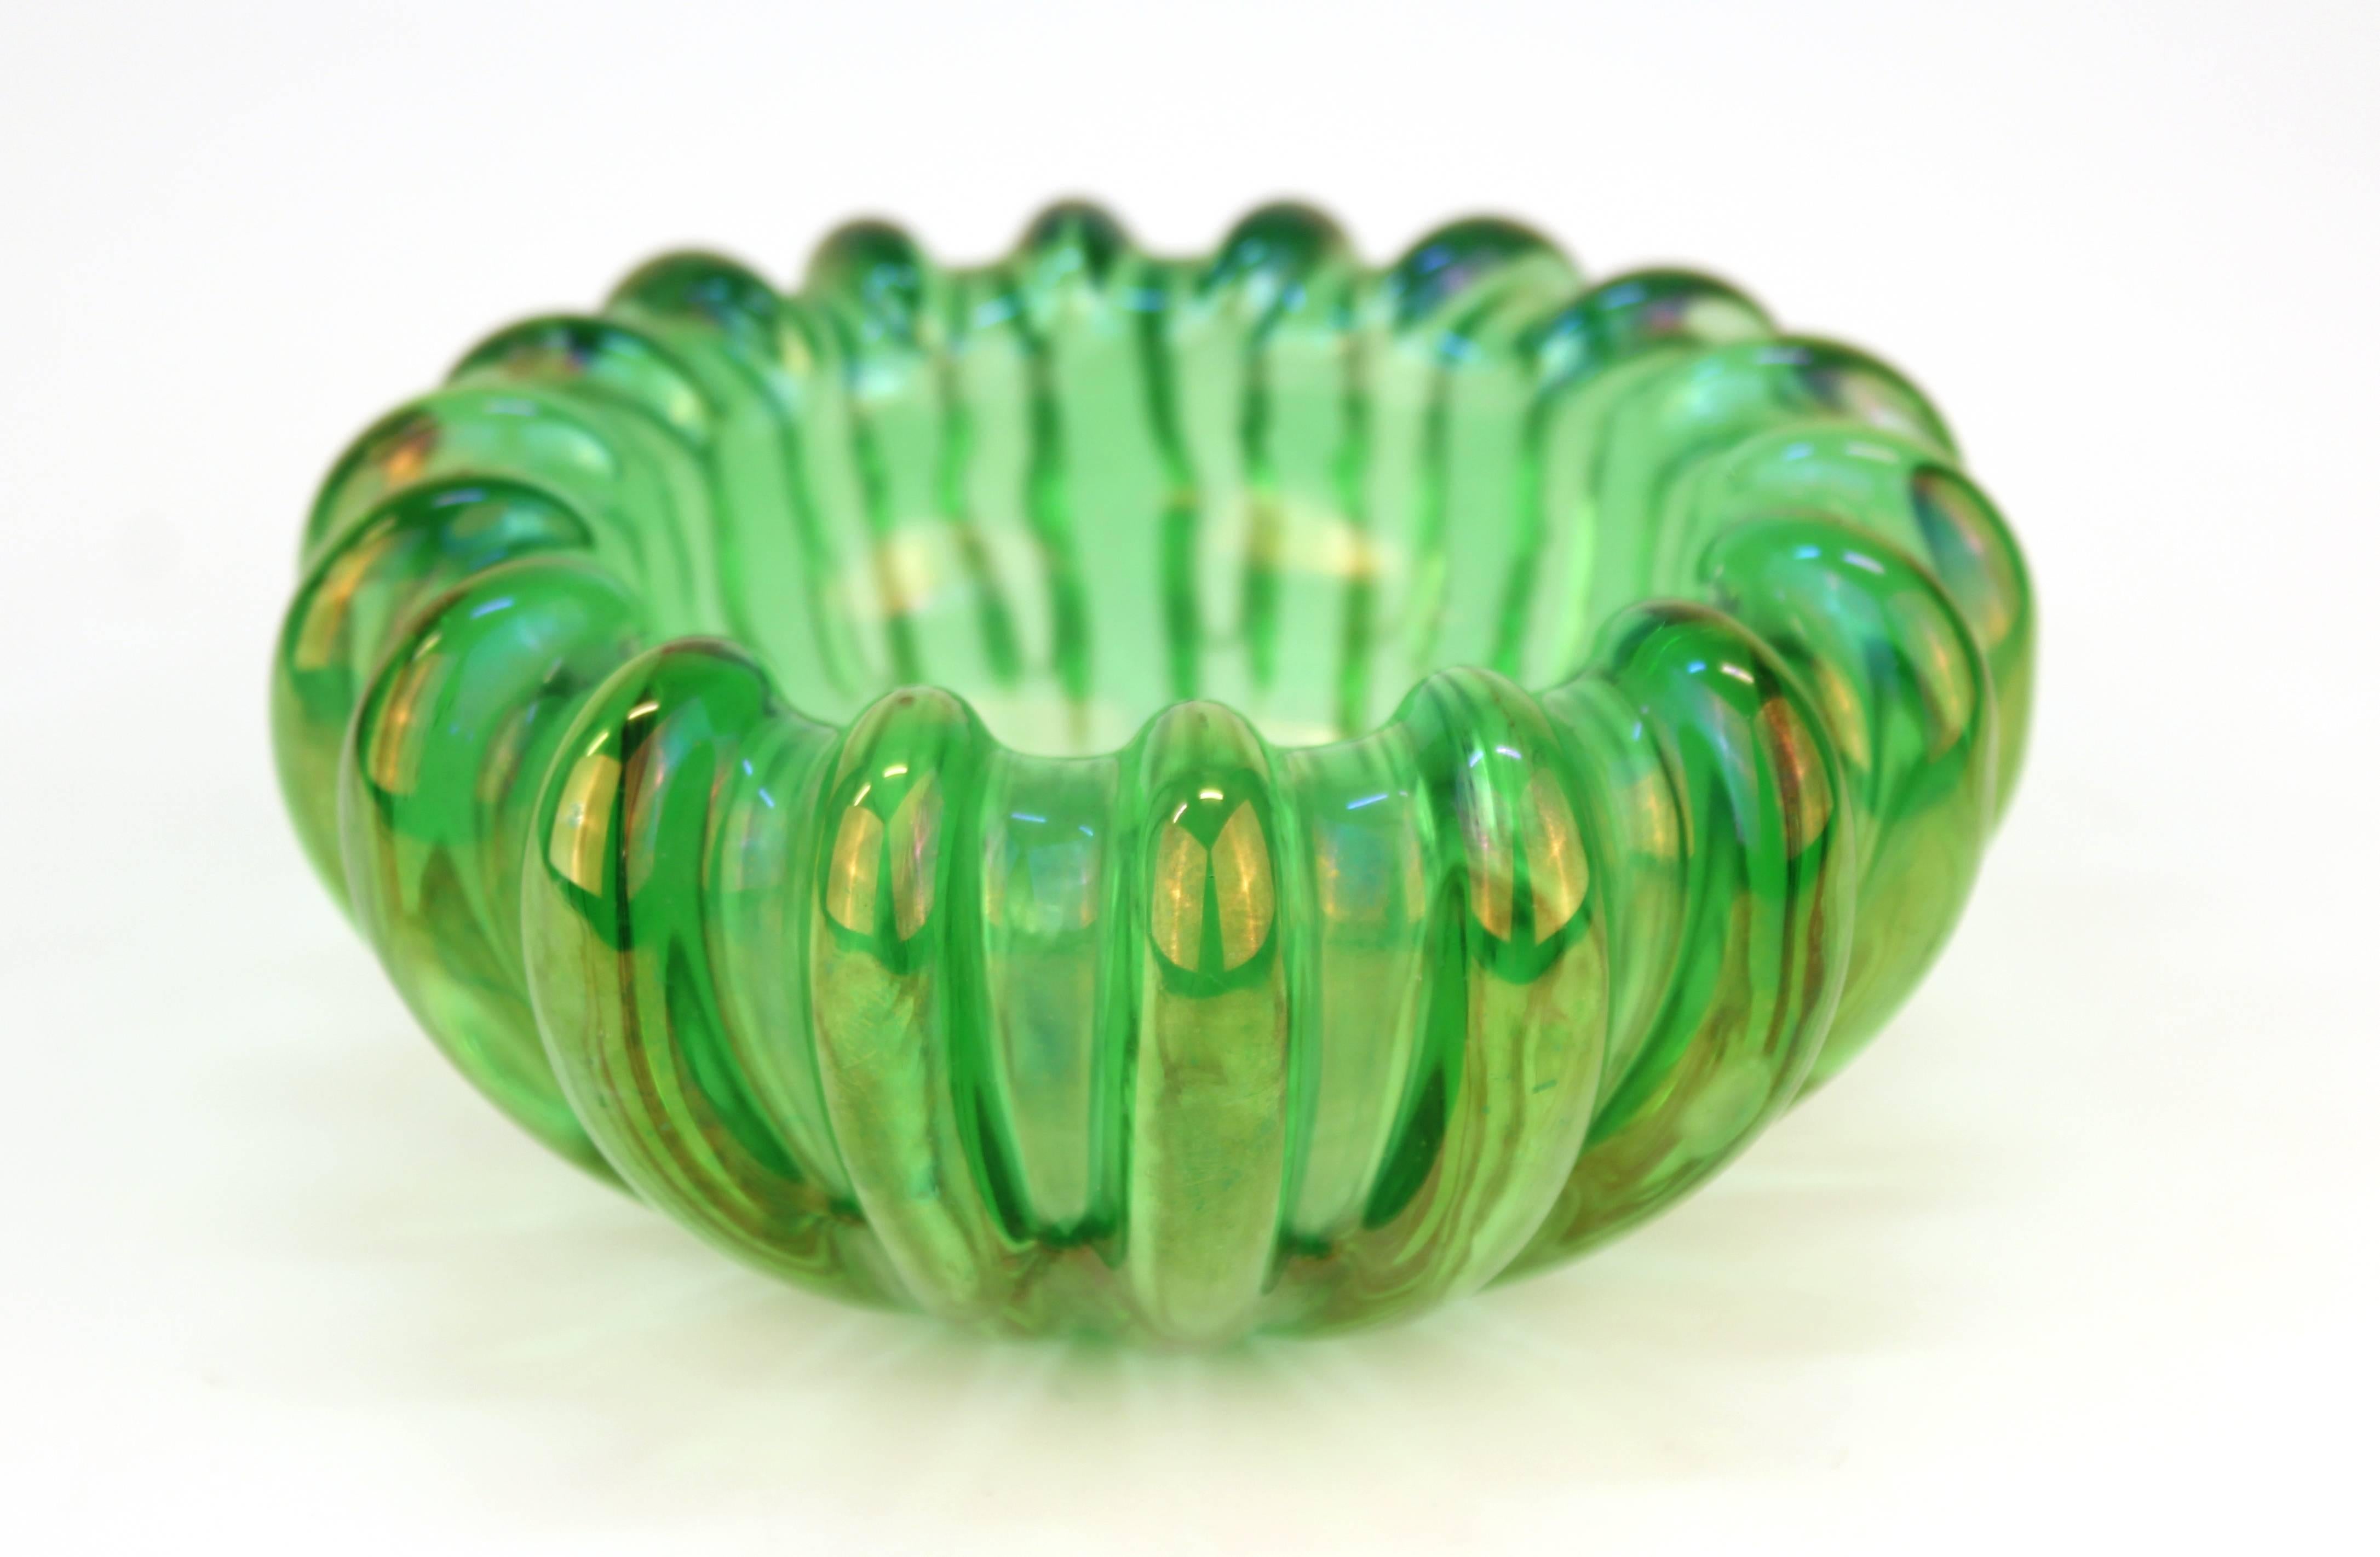 Vienna secessionist bowl in opalescent green glass, with thick heavily ribbed sides, the interior with several trapped bubbles. Small crescent nick to the underside and minor scratches, but overall in good vintage condition.